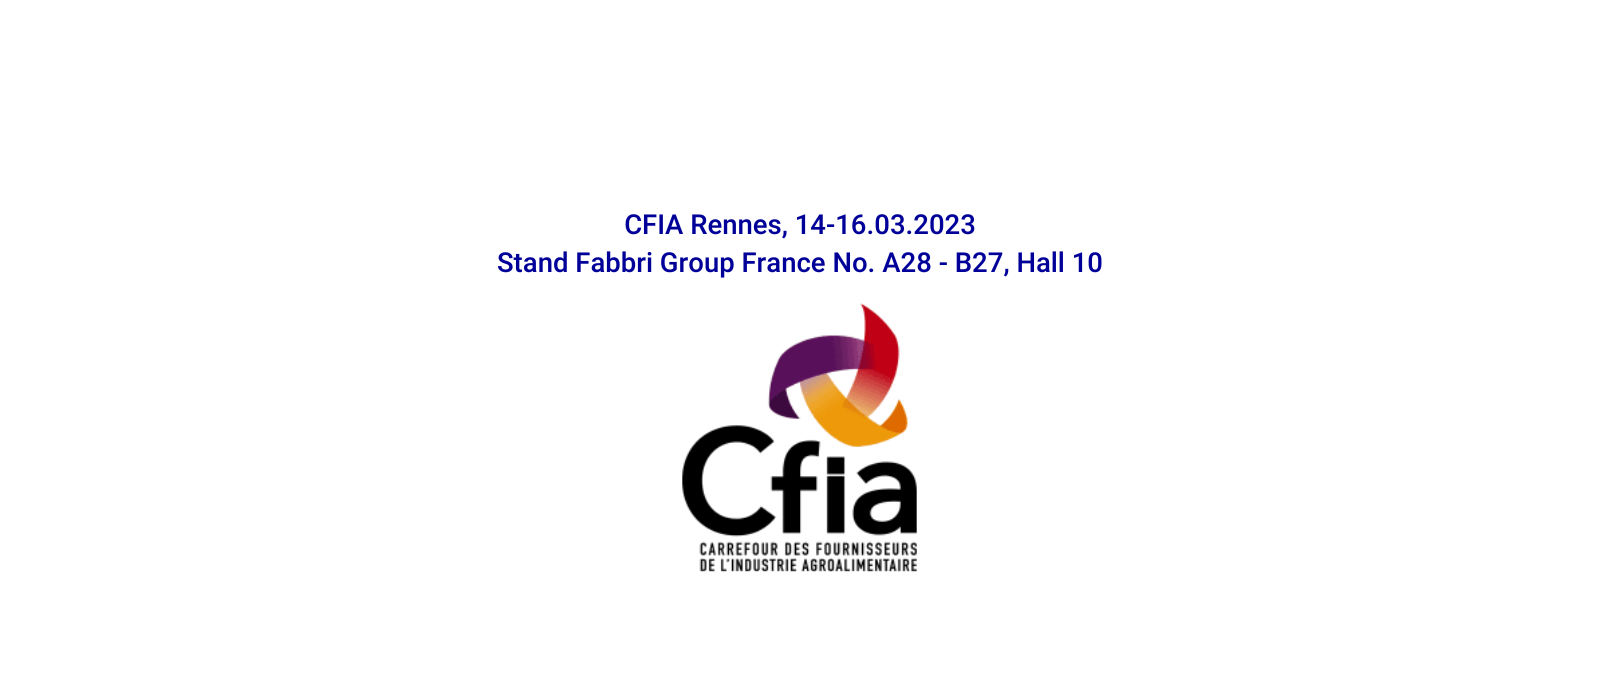 Fabbri Group France invites you to CFIA Rennes 2023